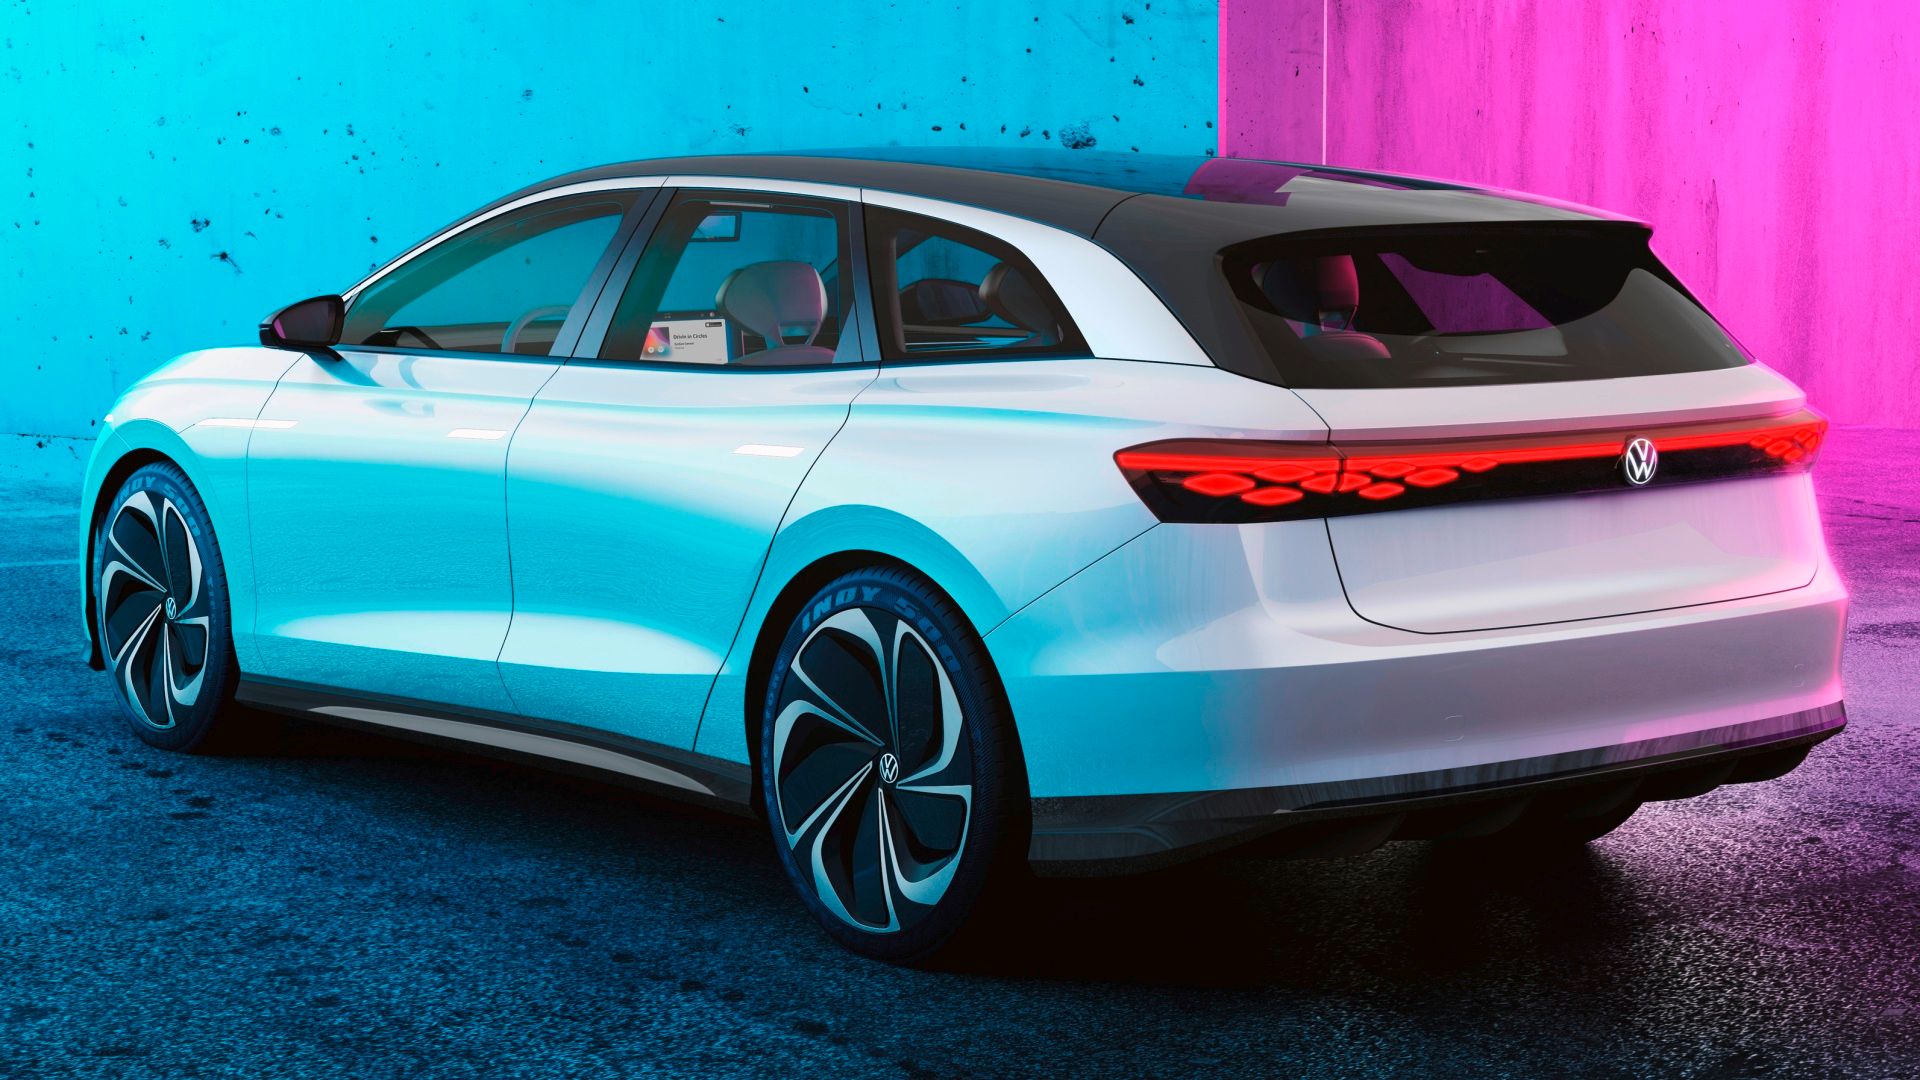 Volkswagen ID4 Embrace The Future with This Electric Vehicle ID4 New Car -  China VW ID4 EV Car, Volkswagens ID4